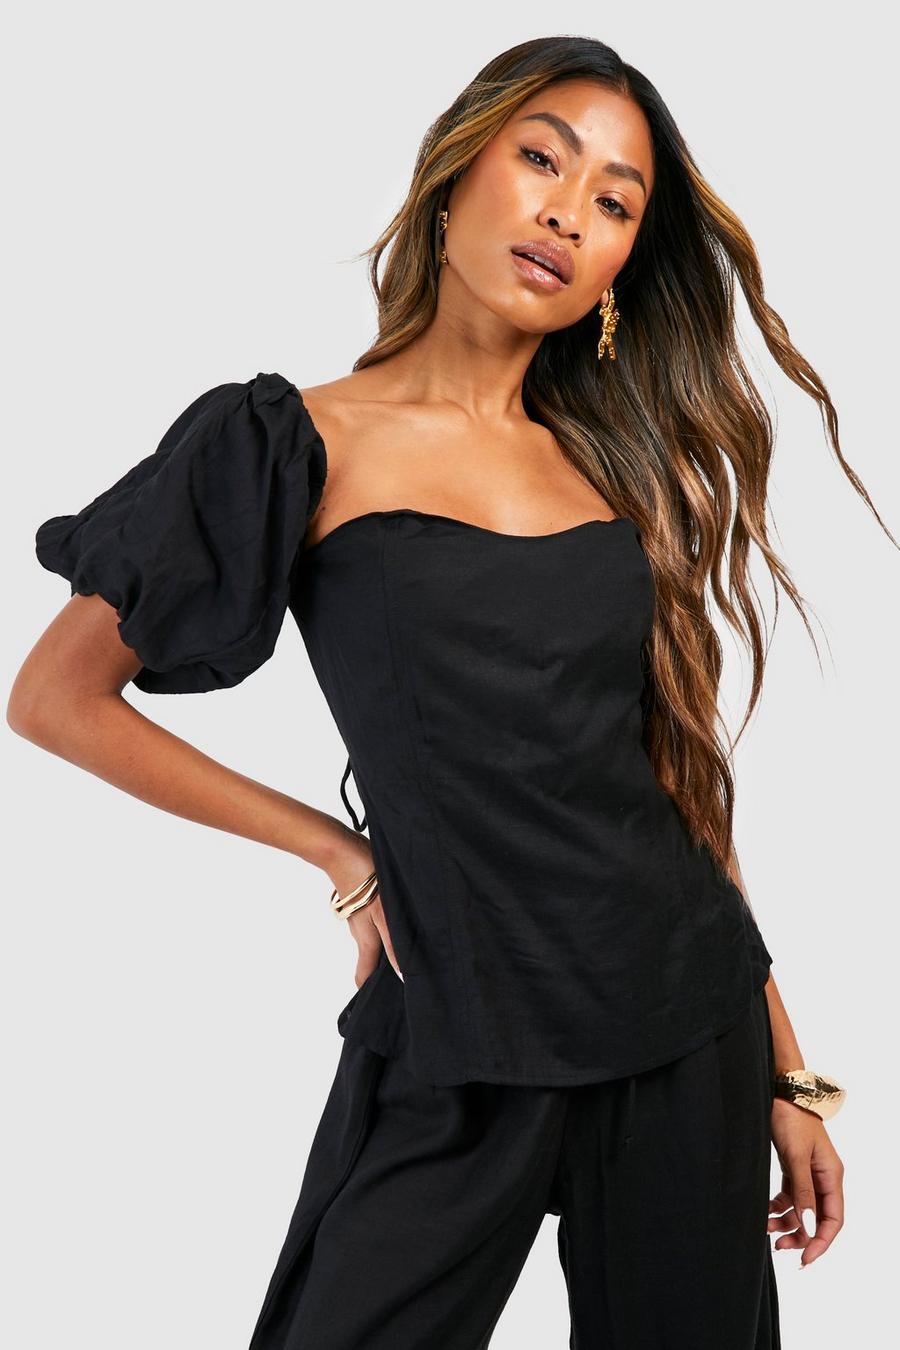 Square-Neck Tops Are the New Off-the-Shoulder Tops - theFashionSpot